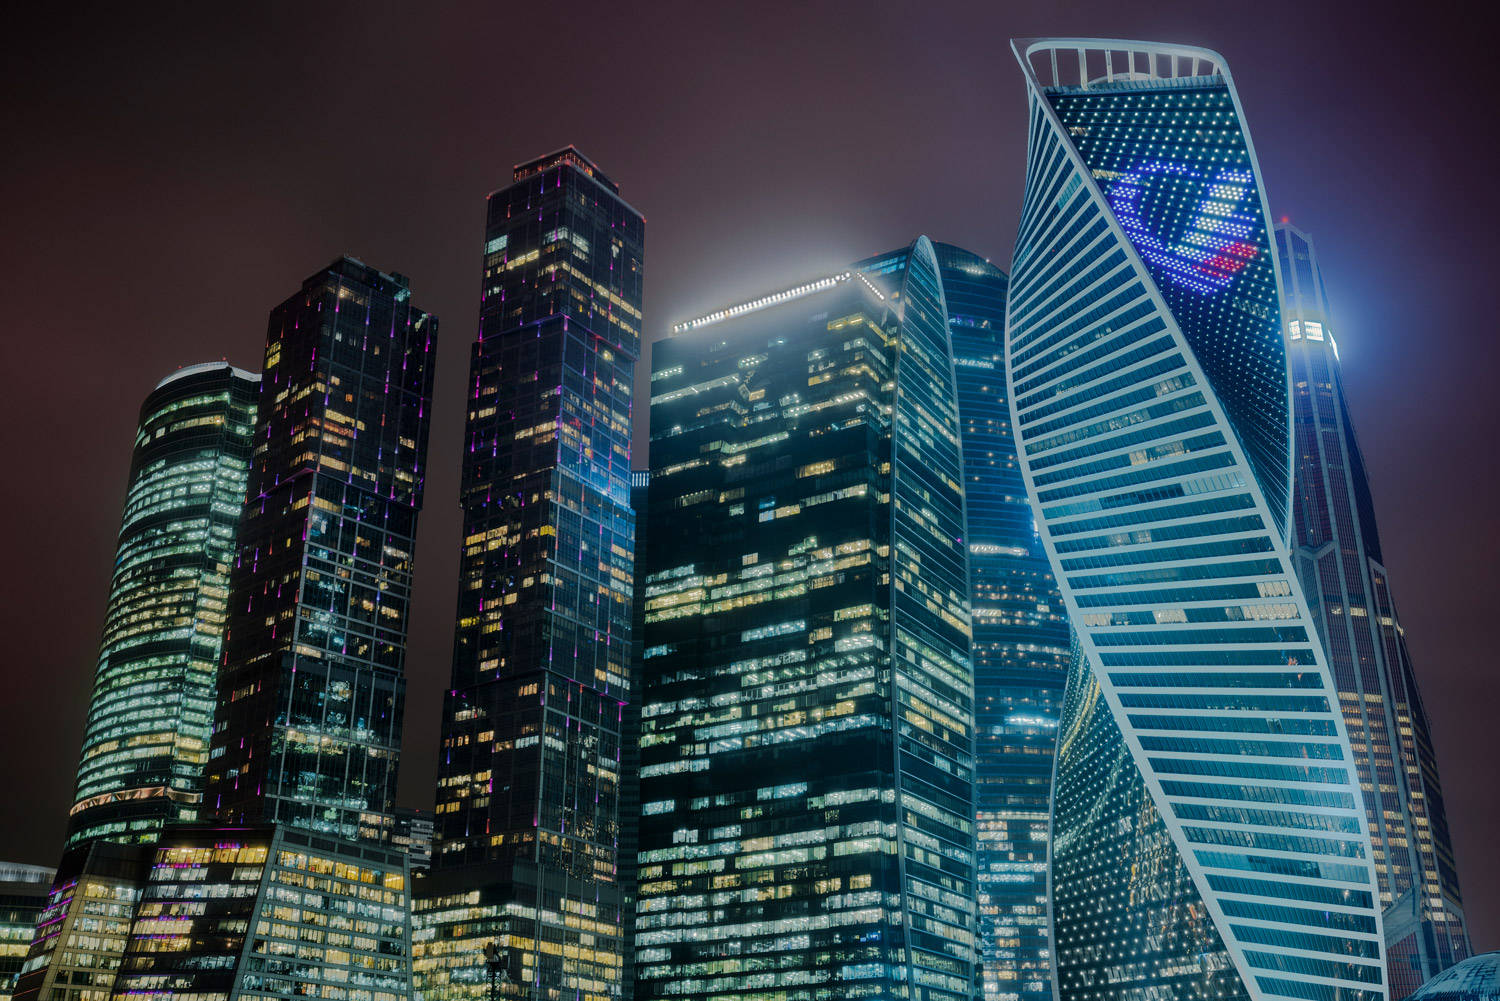 Moscow Illuminated Supertall Skyscrapers Wallpaper